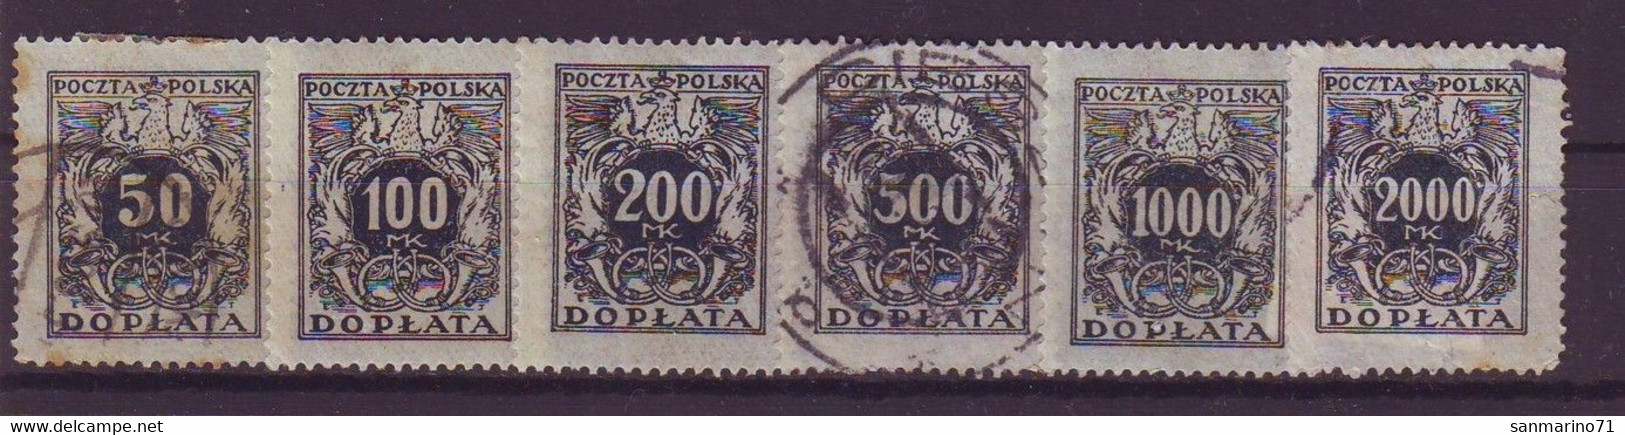 POLAND 45-50,used - Oficiales